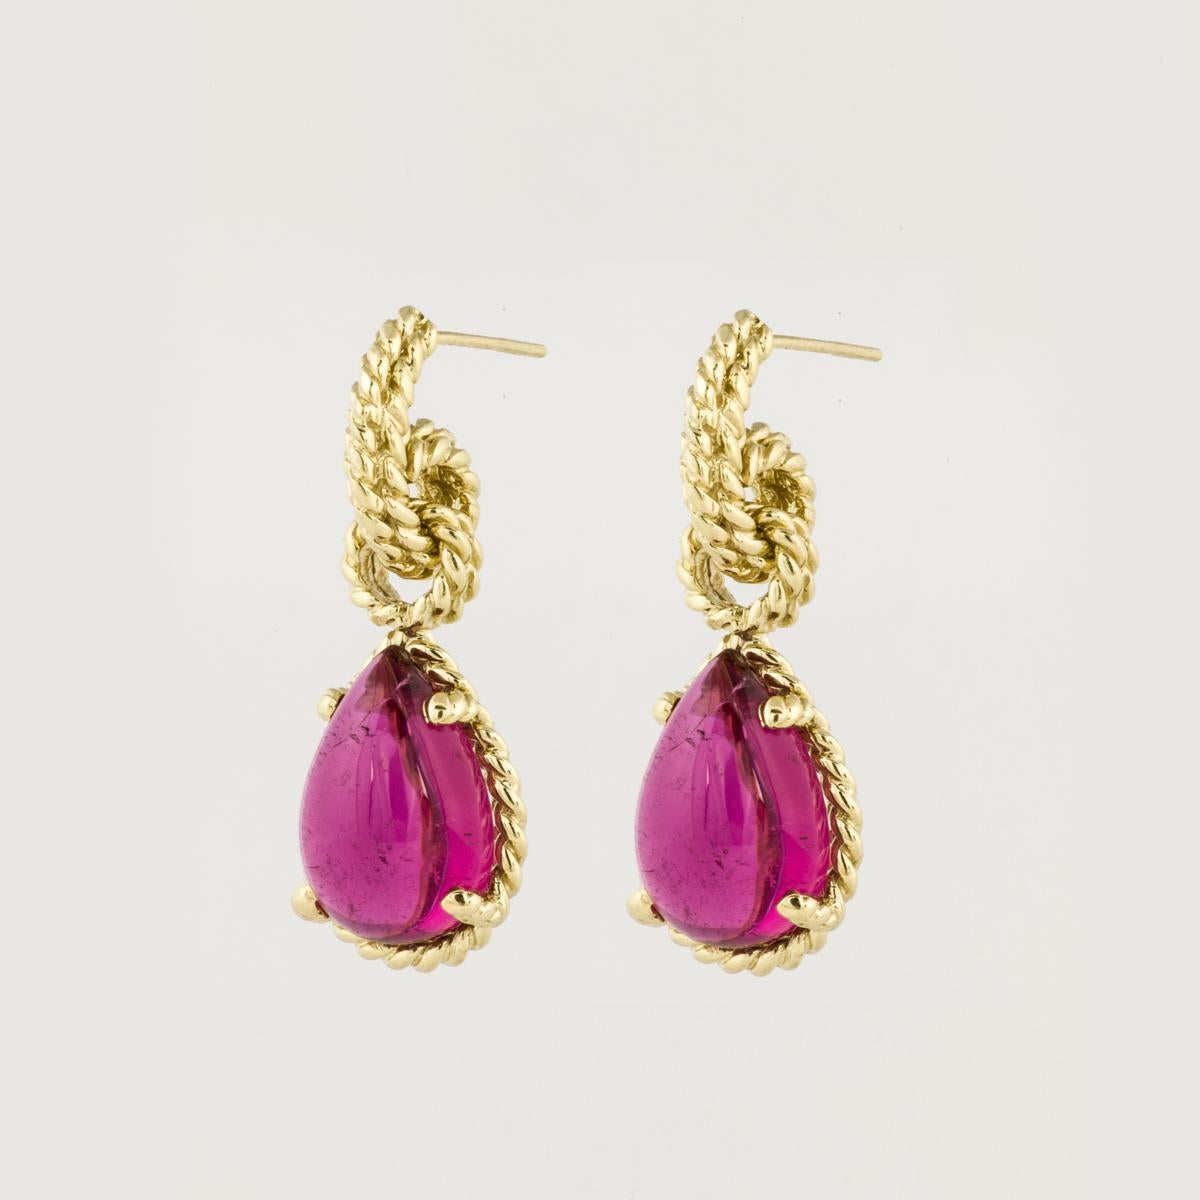 18K yellow gold pink tourmaline drop earrings by Cassis.  The pear-shaped cabochon pink tourmaline are set in a rope design, and the earrings measure 1 1/4 inches long and 1/2 inch wide.  They are made for pierced ears with post and clutch back.